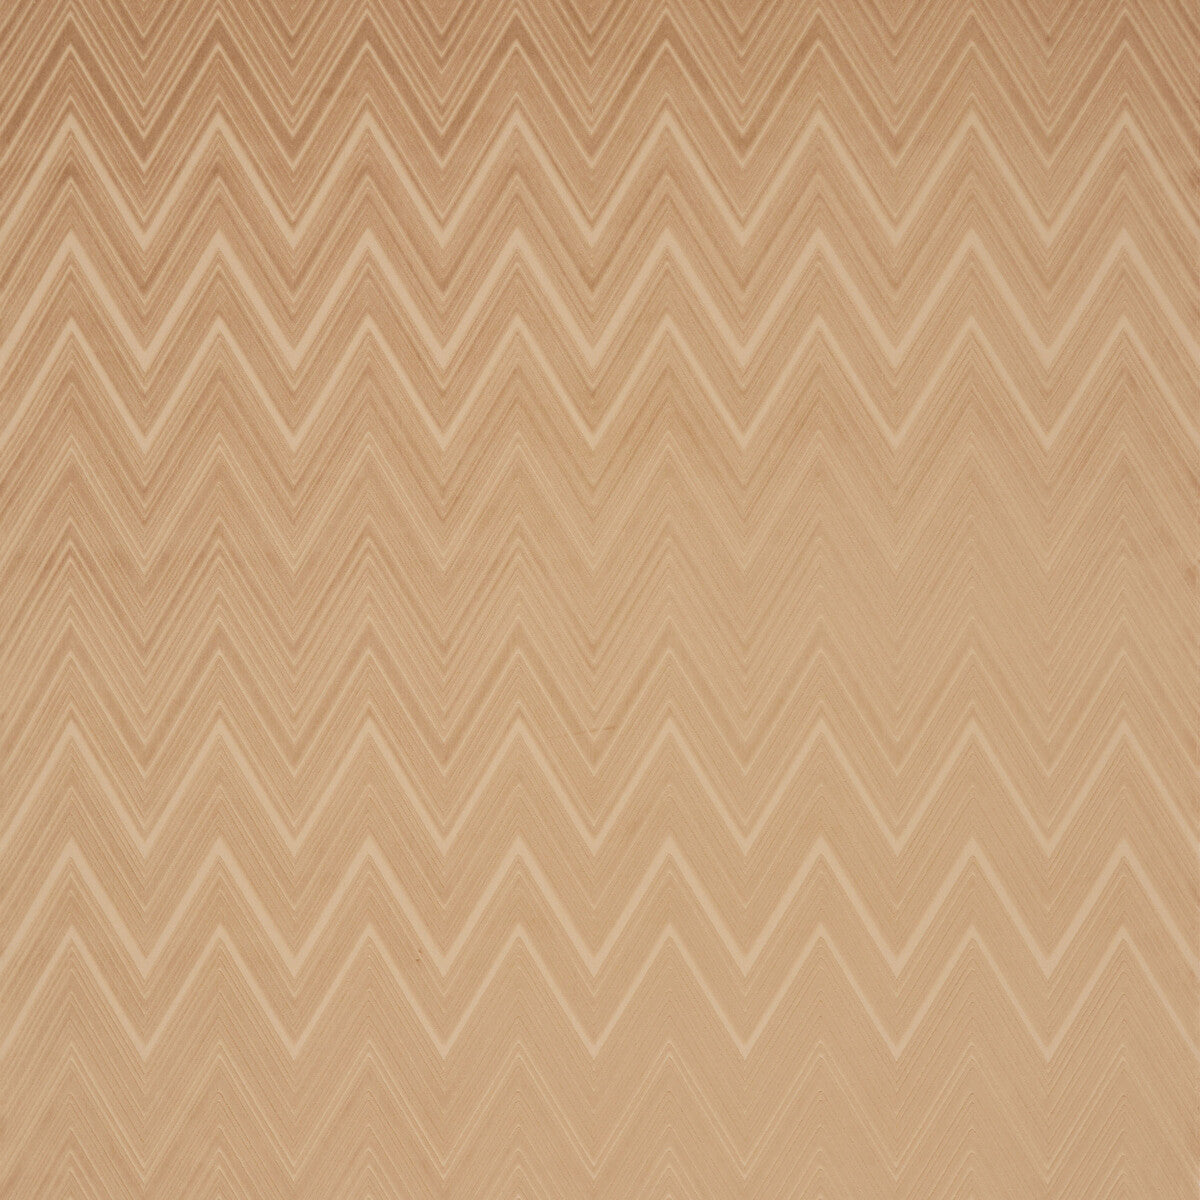 Basel fabric in 48 color - pattern 36704.16.0 - by Kravet Couture in the Missoni Home collection